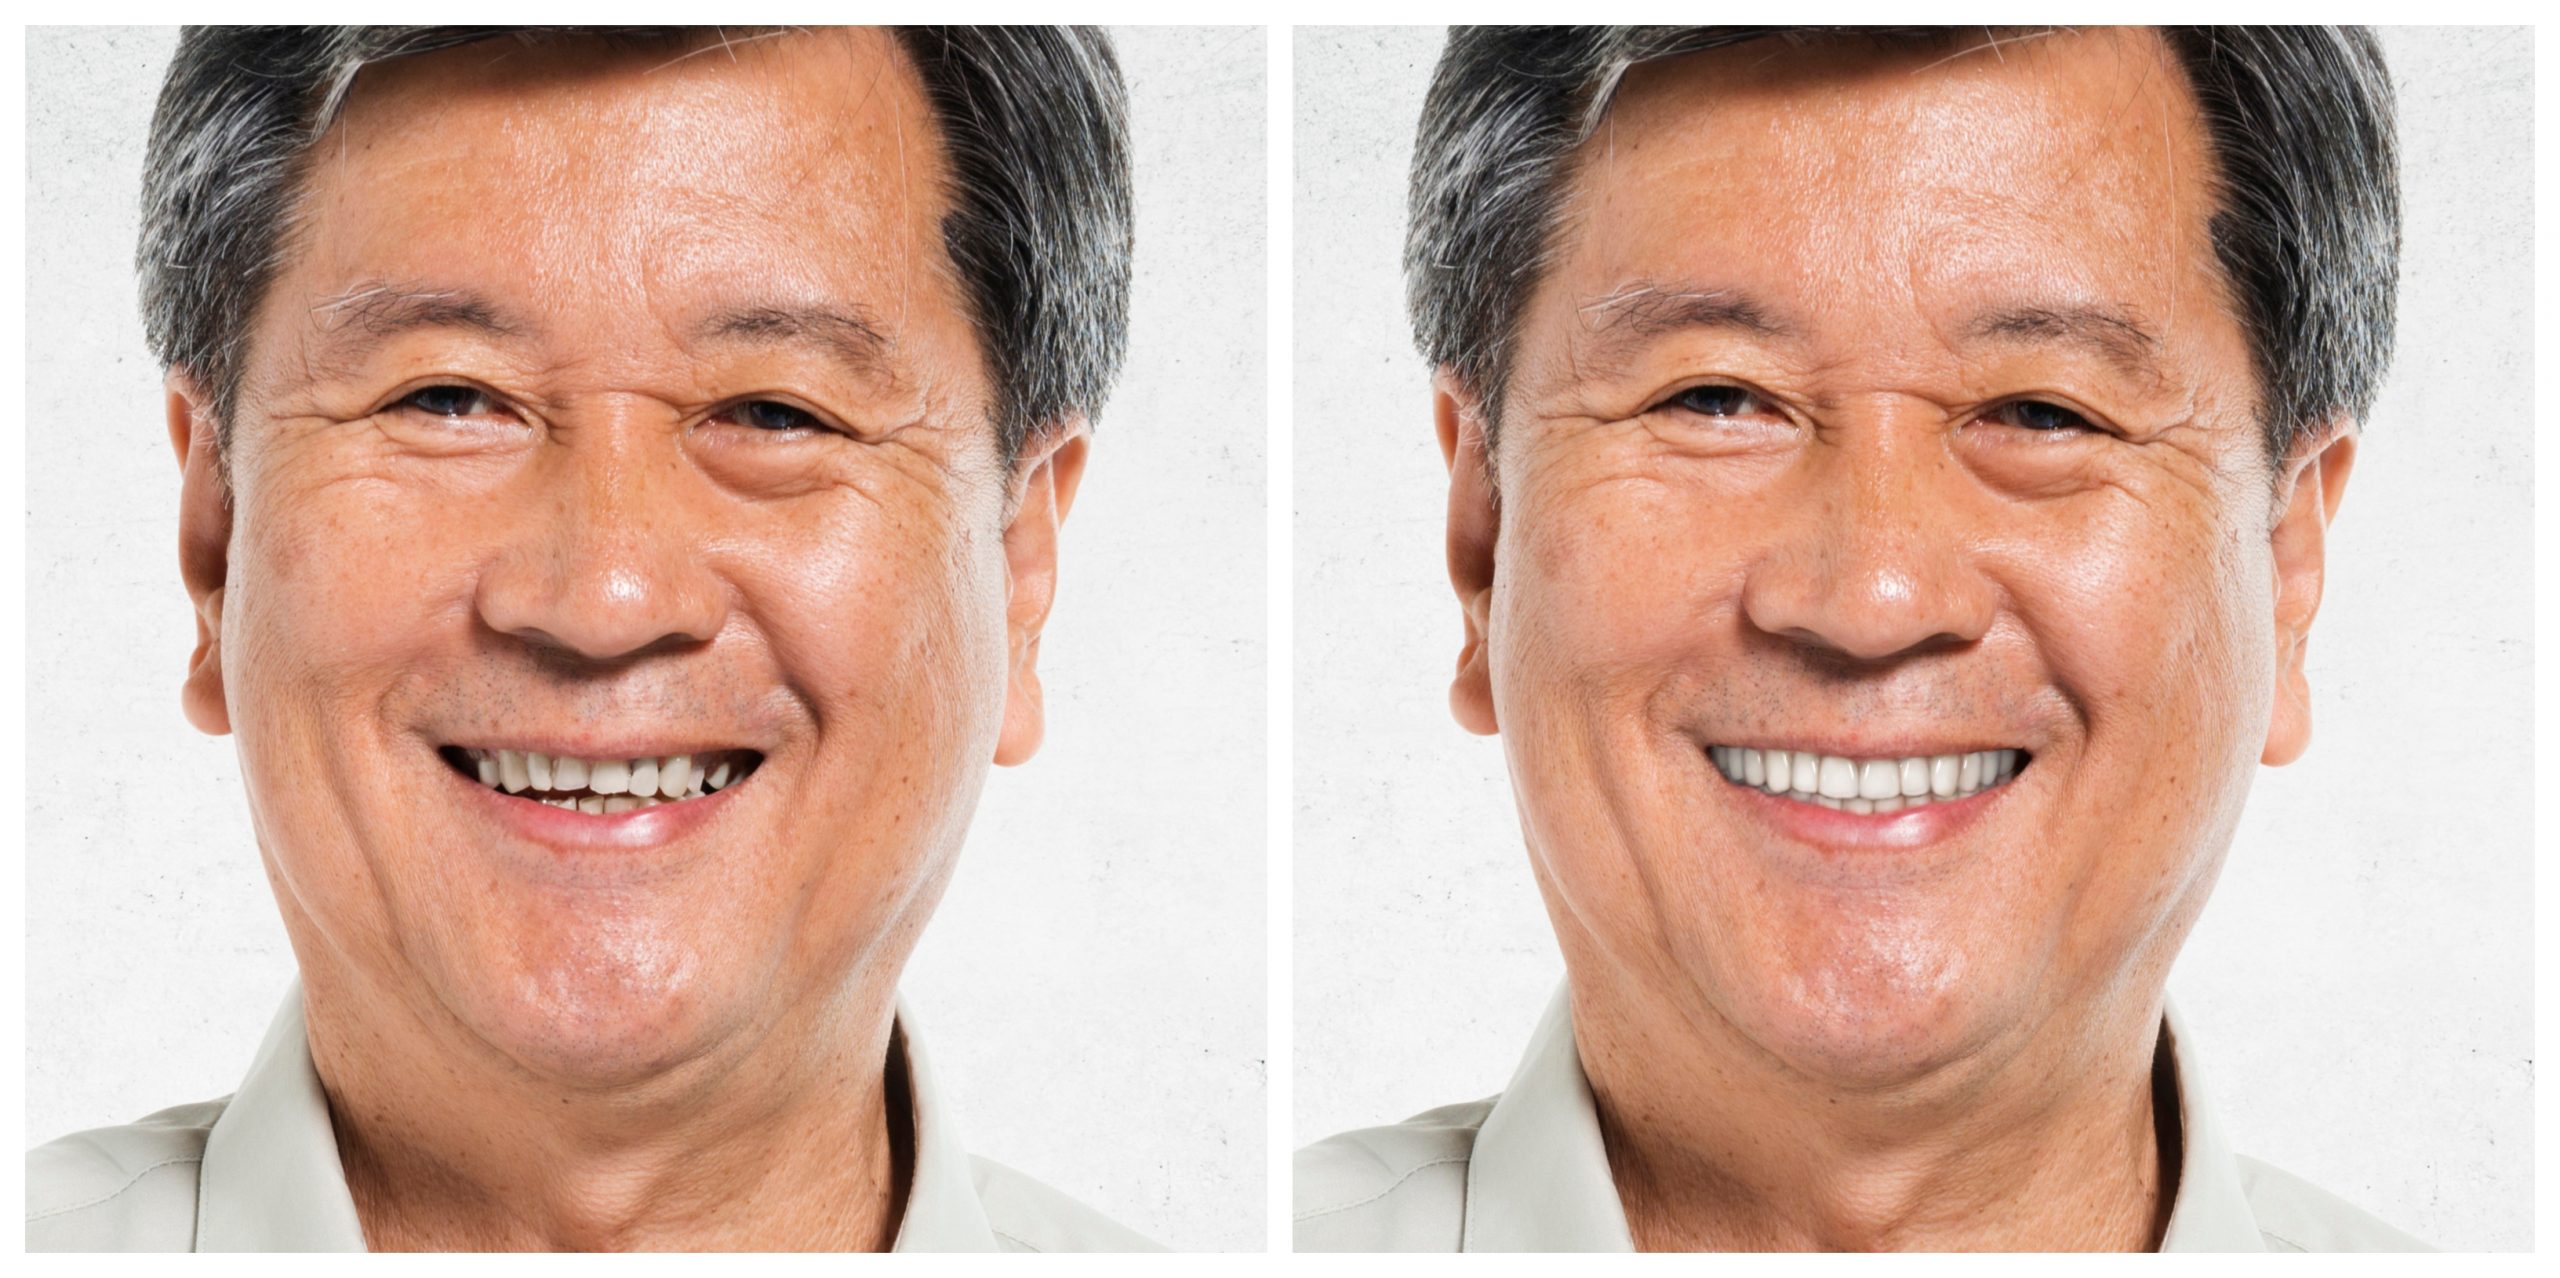 Smile Restoration - Before and After21